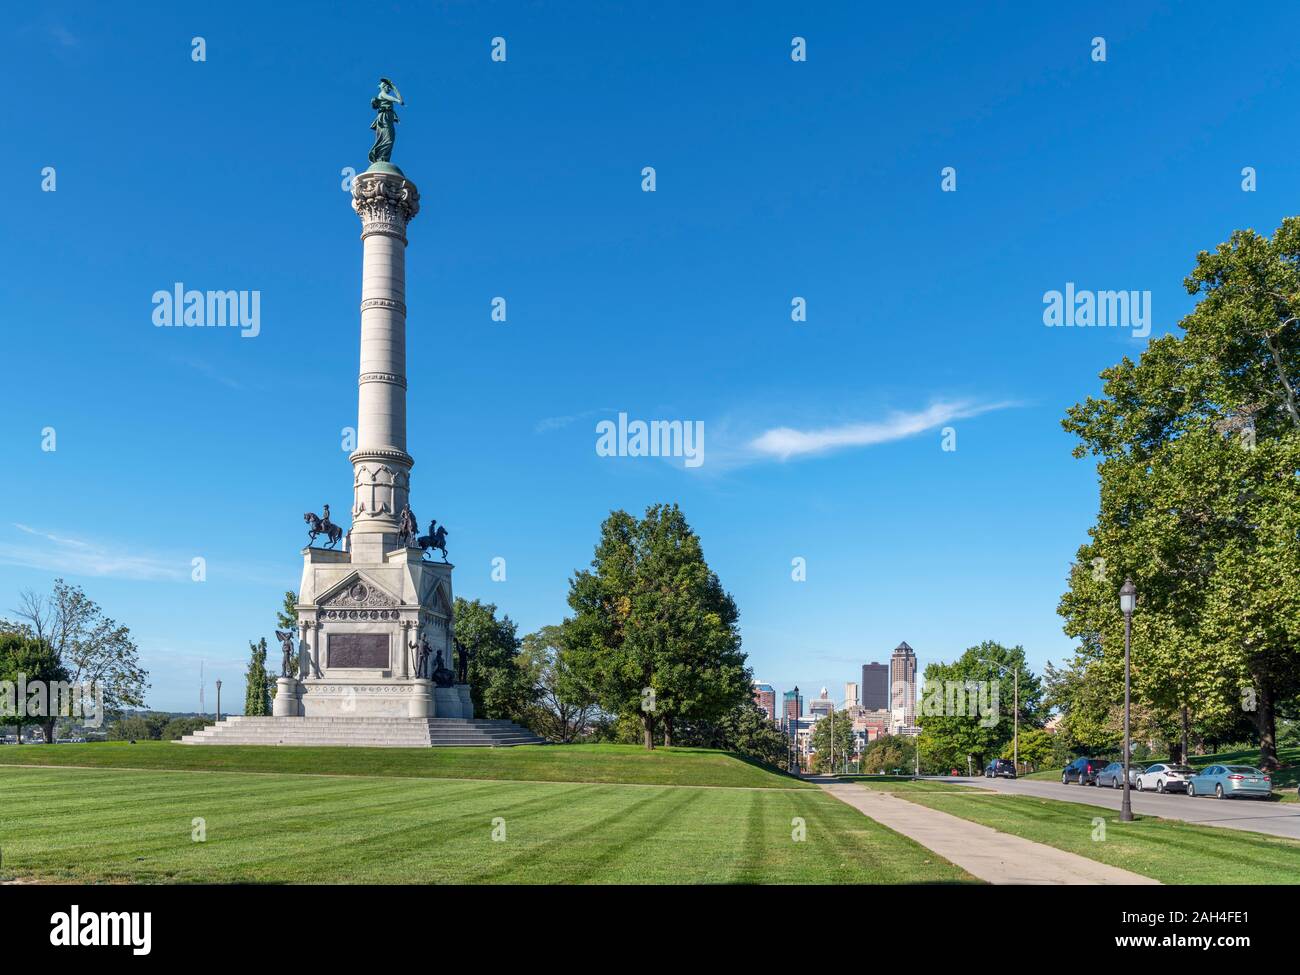 View towards downtown from the Soldiers and Sailors Monument, Des Moines, Iowa, USA. Stock Photo